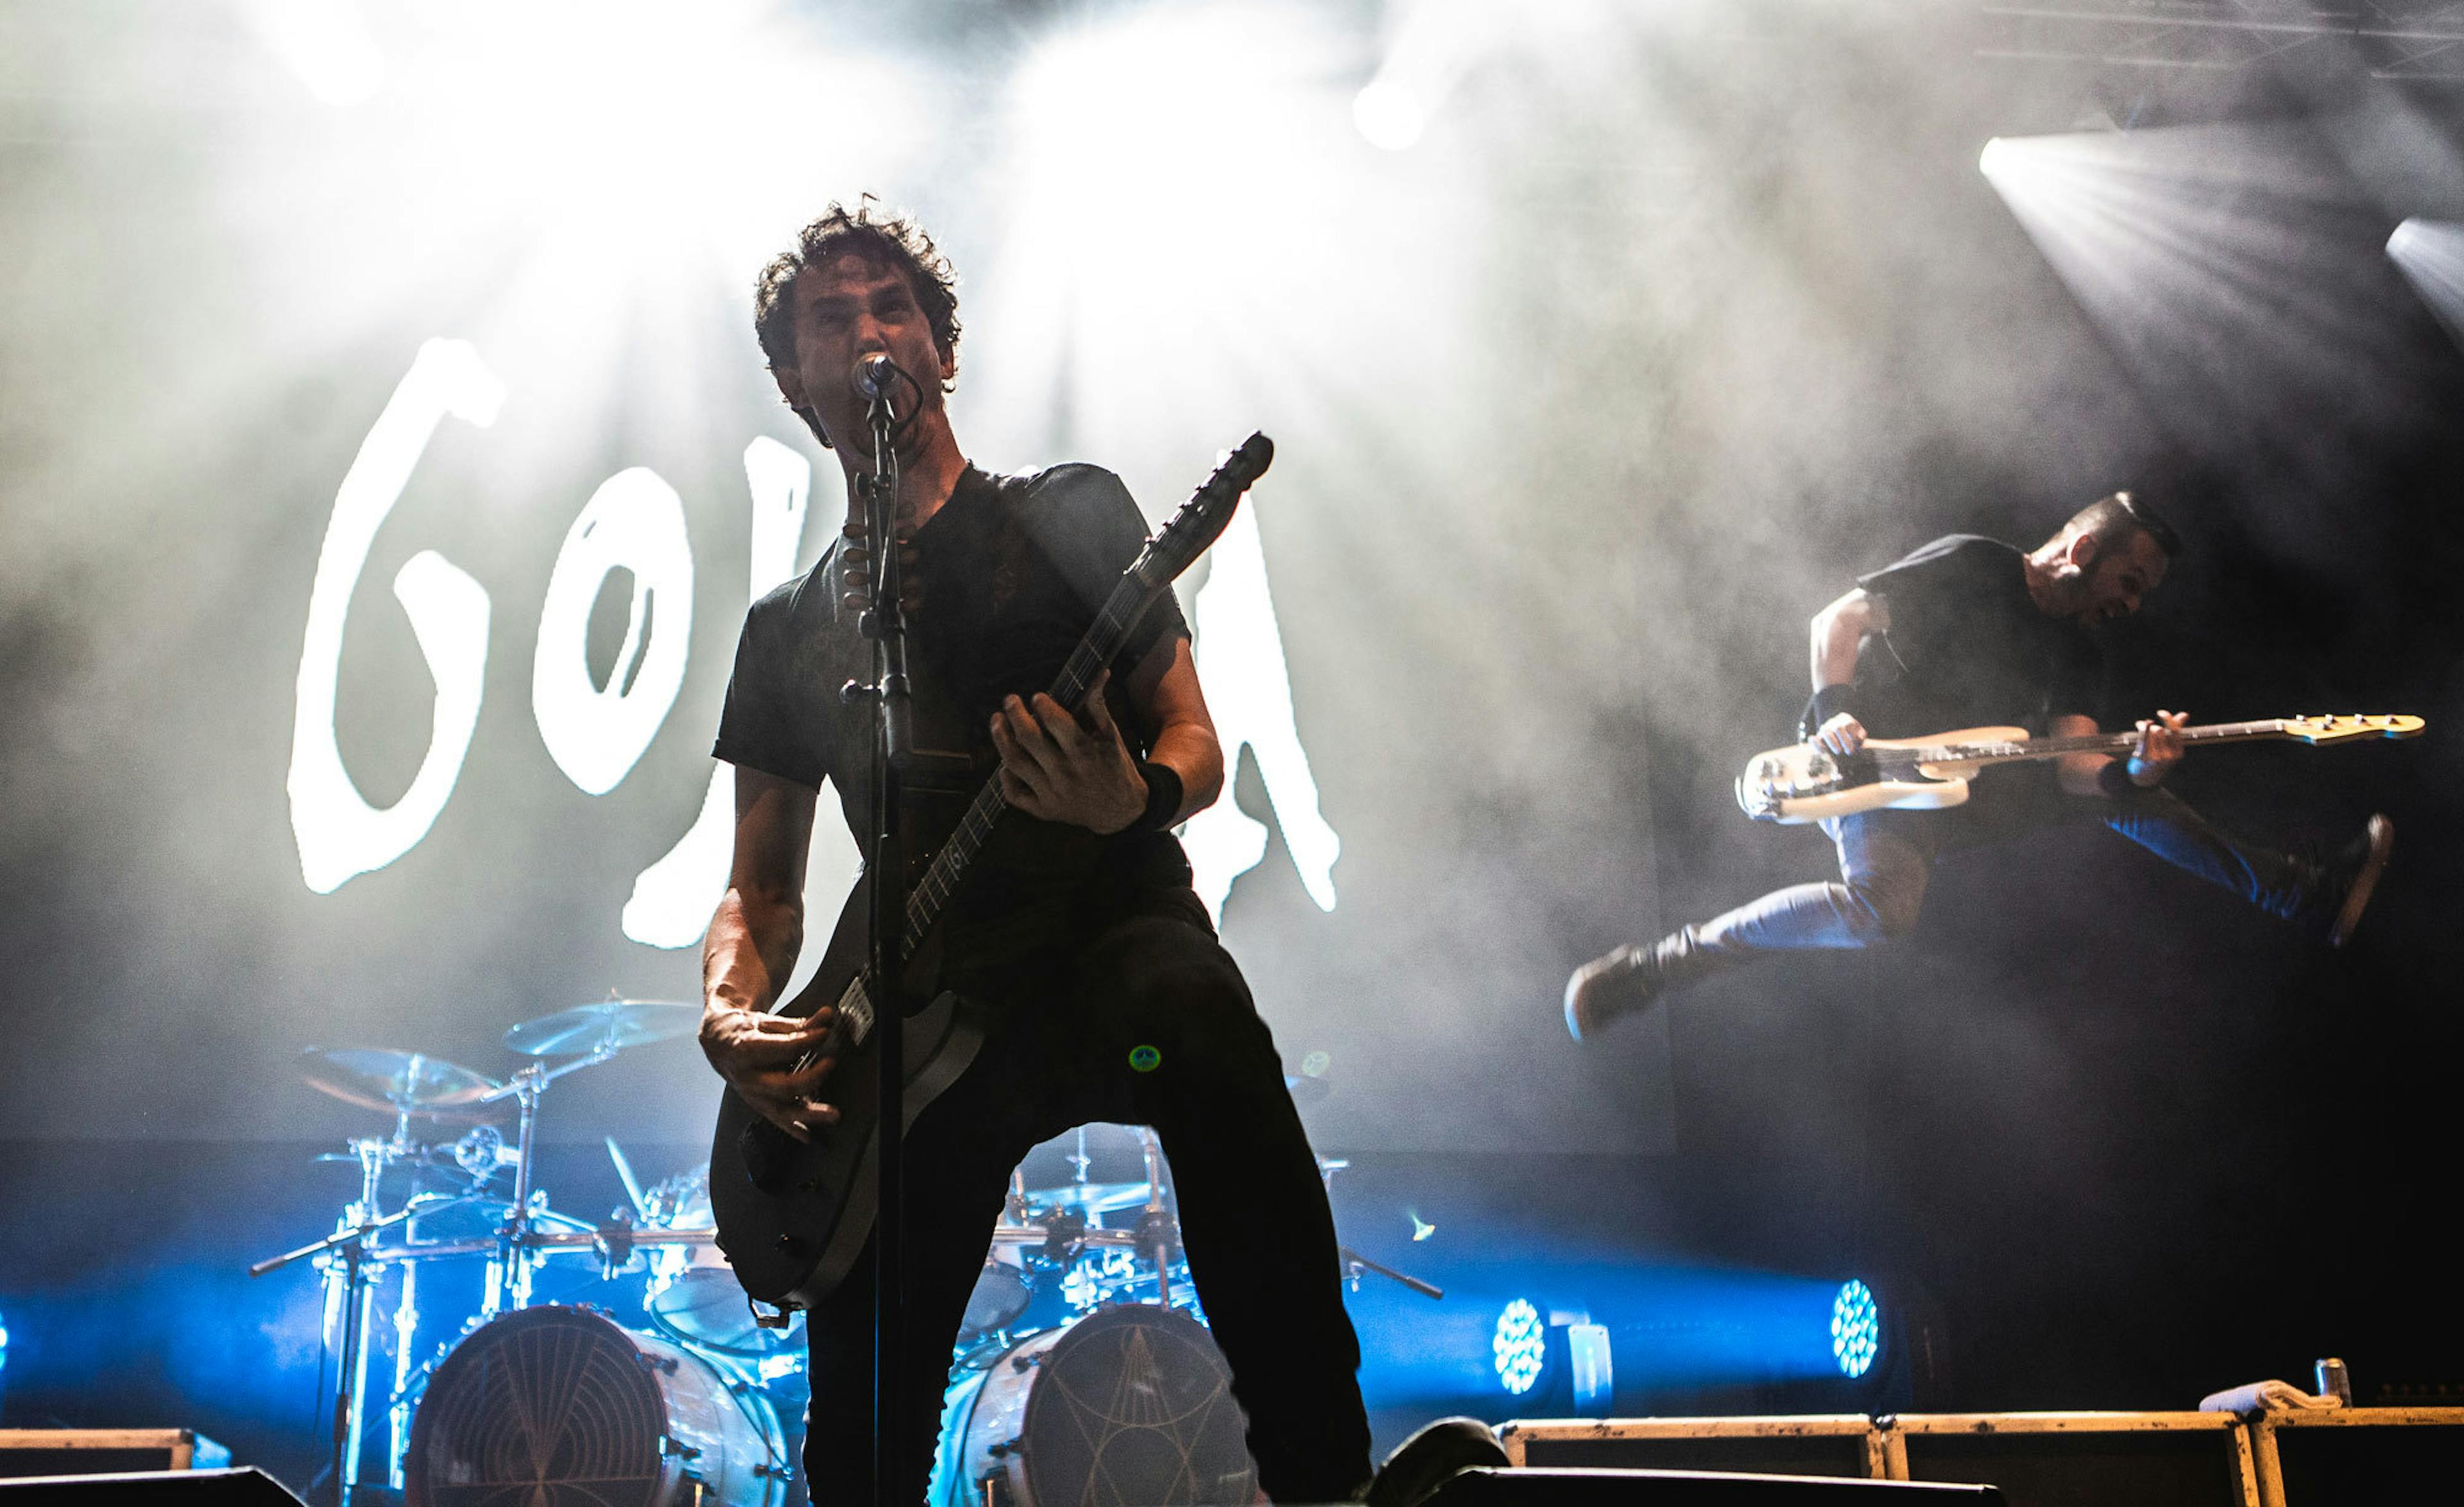 Gojira announce European / UK tour with Alien Weaponry and Employed To Serve